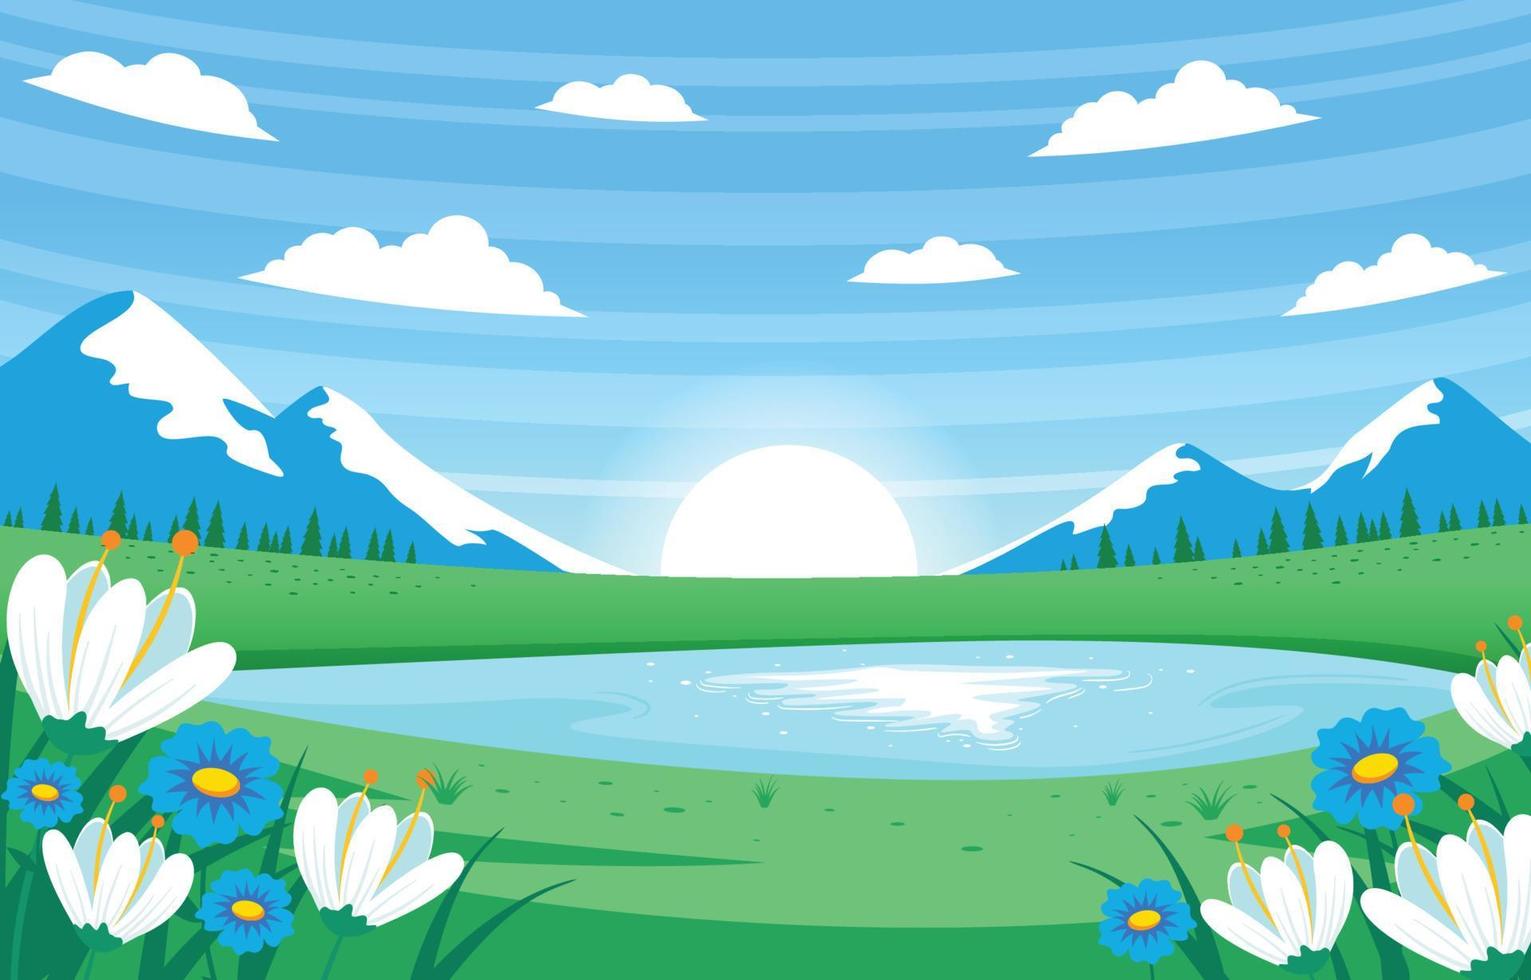 Spring with Lake and Mountain Landcscape View Background vector